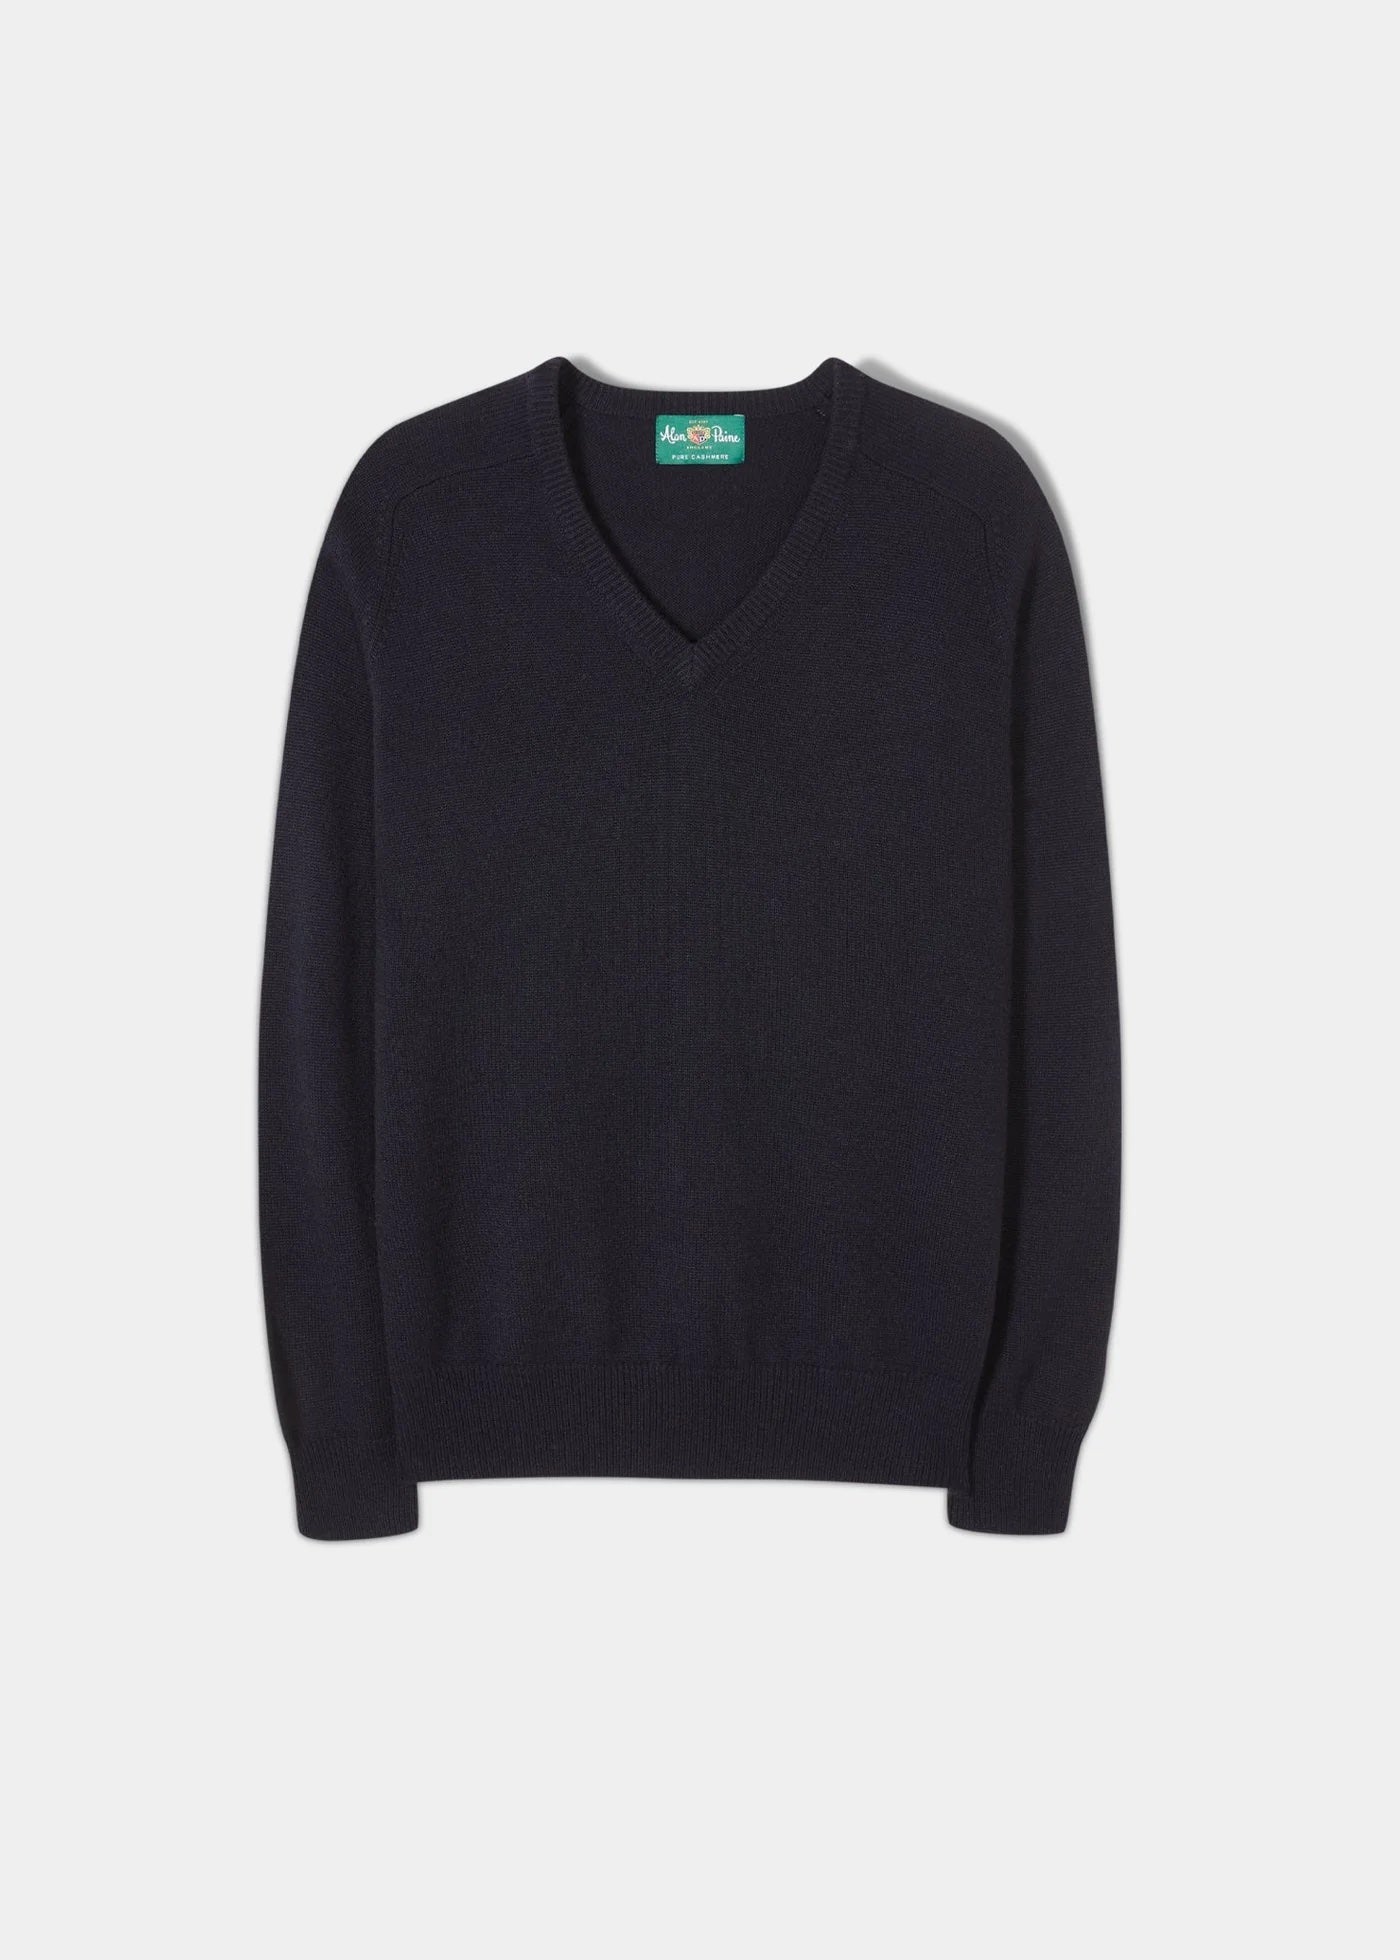 Selkirk Cashmere Sweater